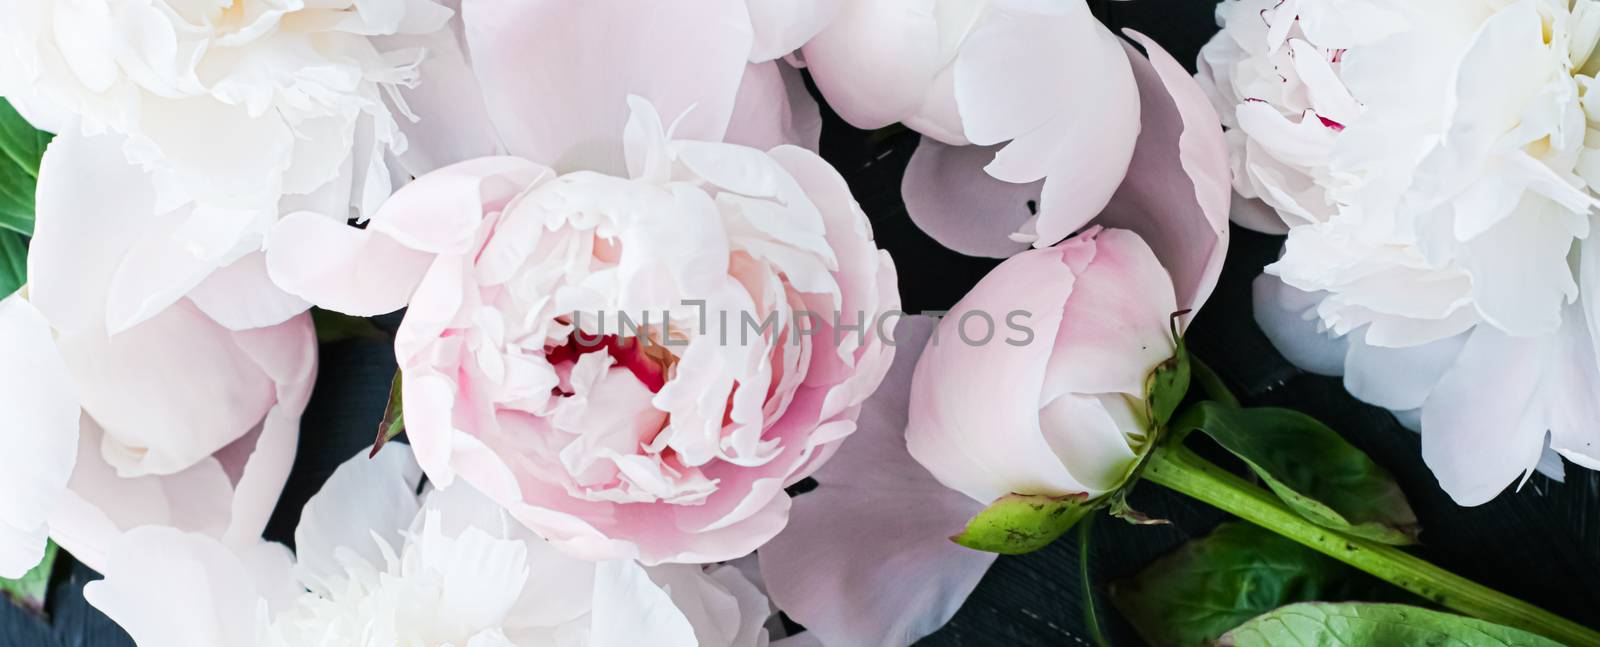 Blooming peony flowers as floral art background, botanical flatlay and luxury branding design